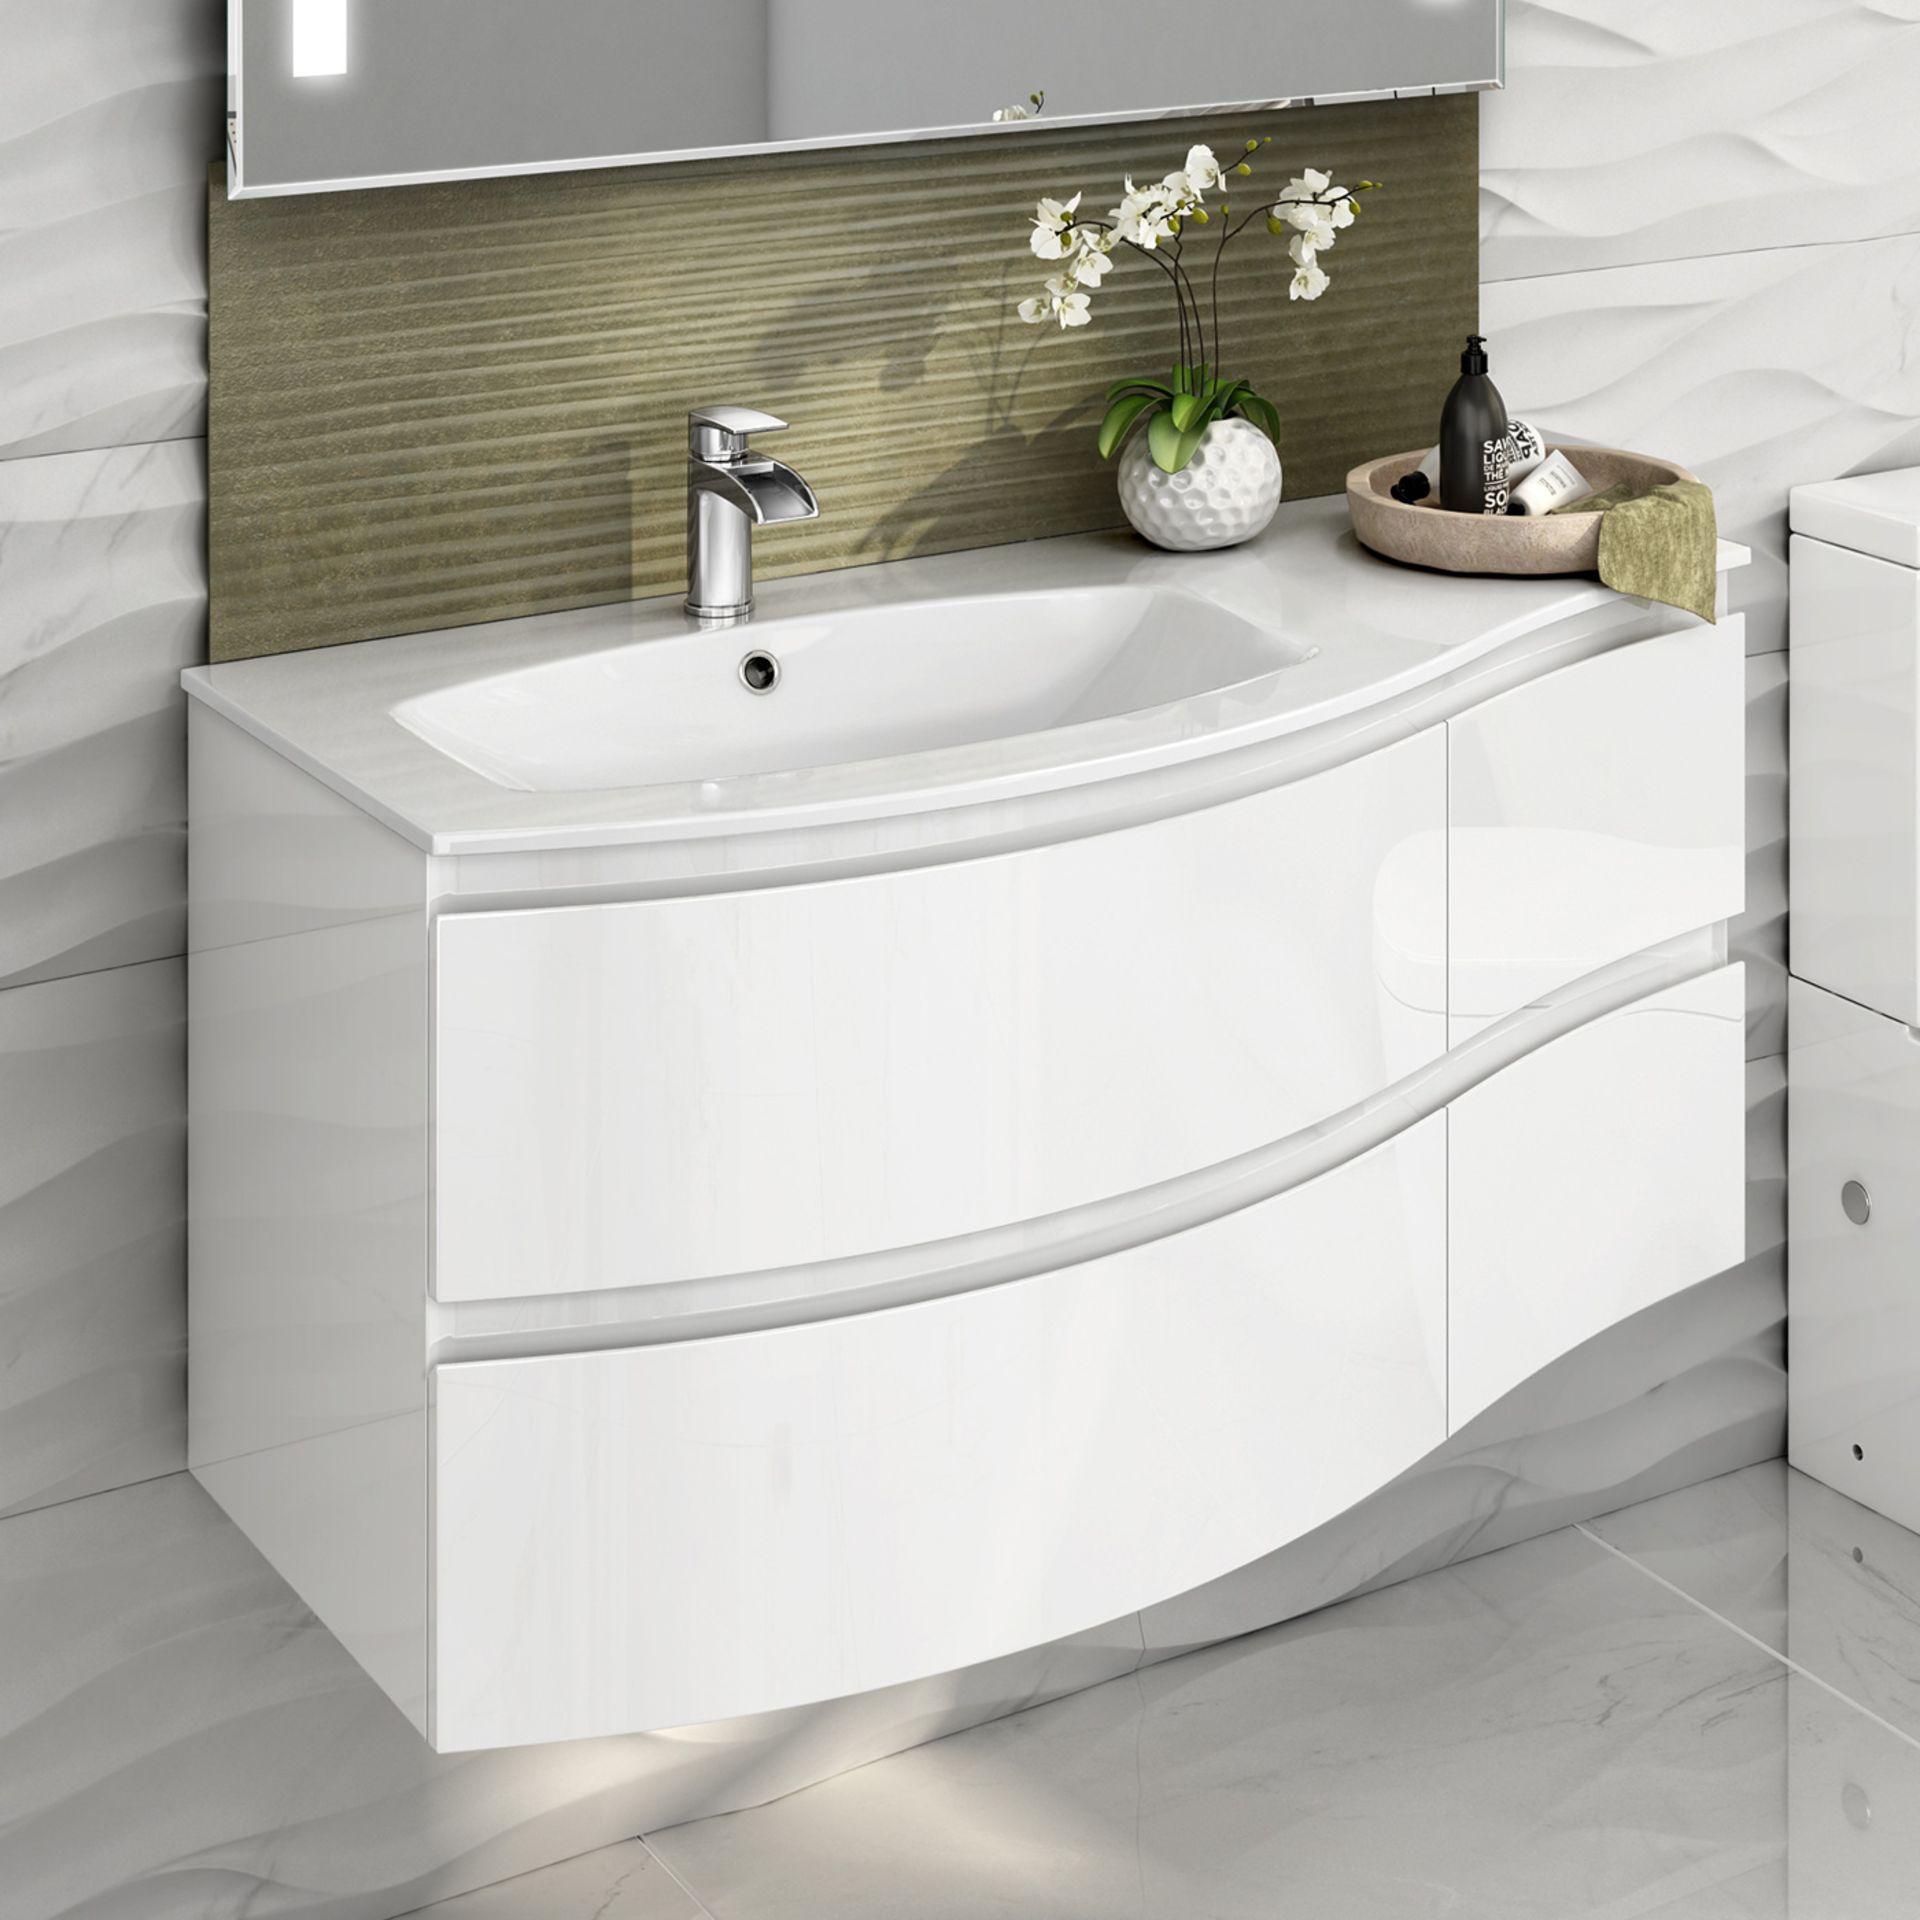 (O1) 1040mm Amelie High Gloss White Curved Vanity Unit - Left Hand - Wall Hung. RRP £1,199. COMES